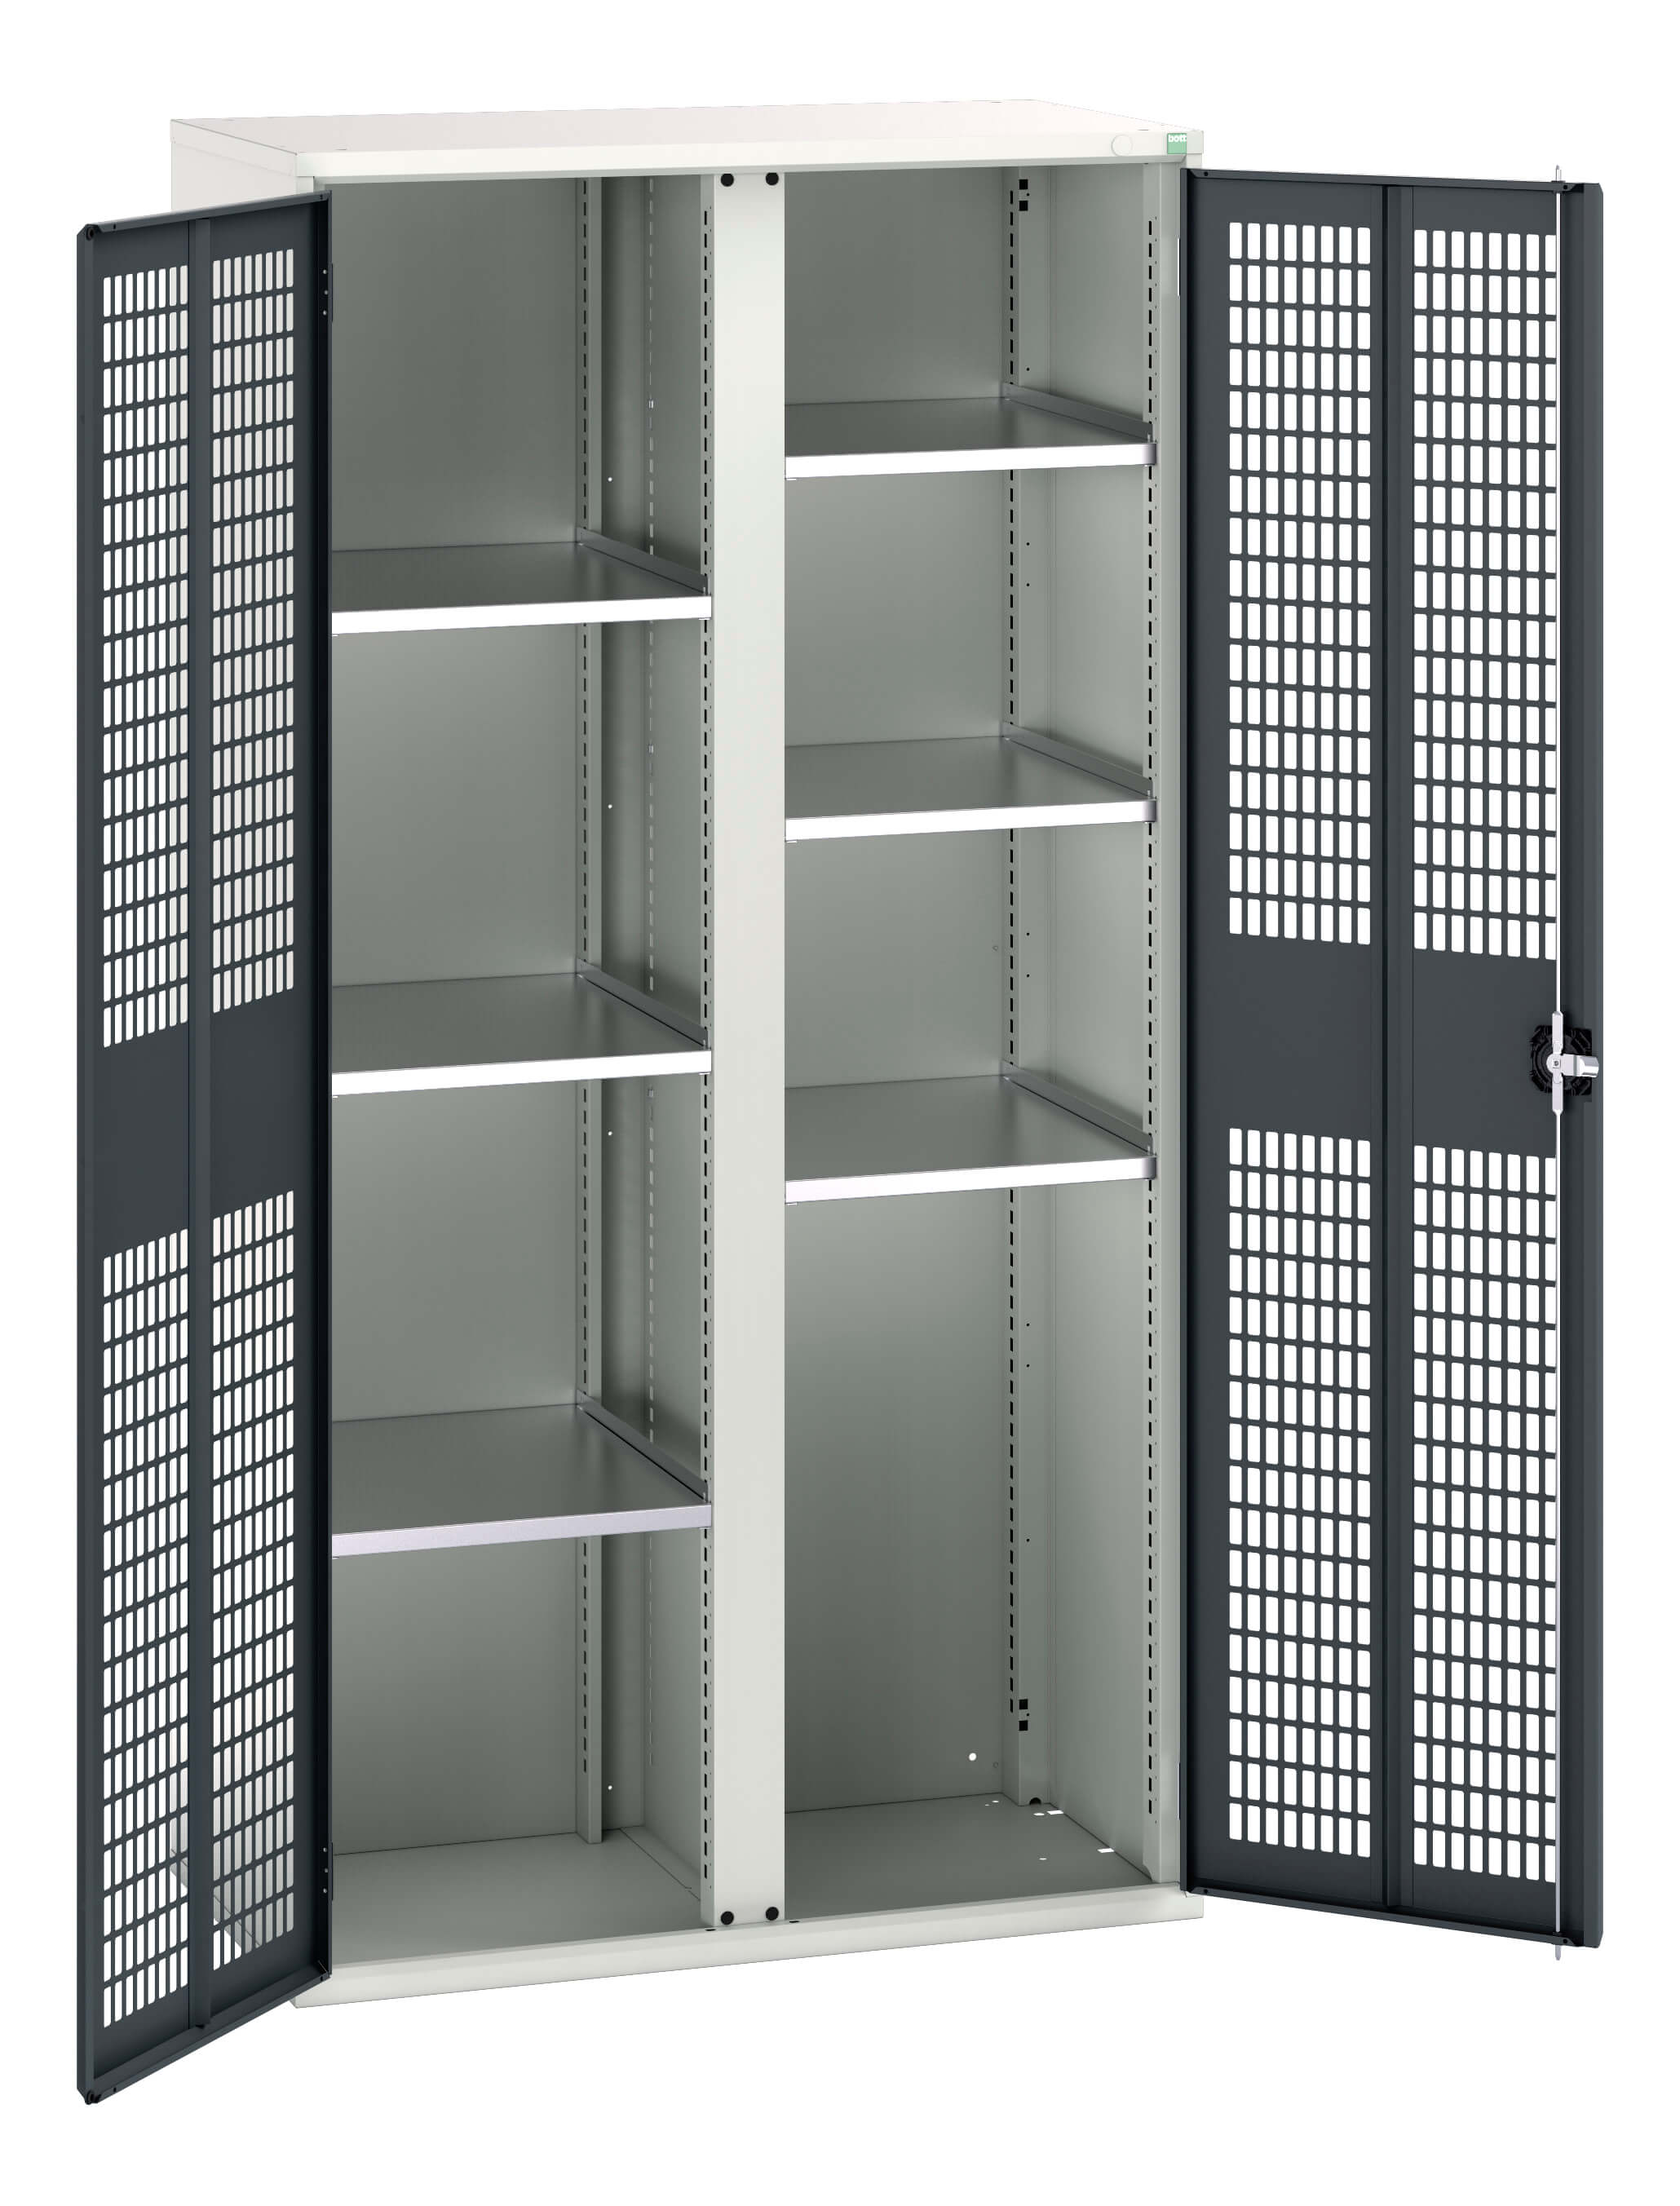 Bott Verso Ventilated Door Kitted Cupboard With Vertical Partition - 16926775.19